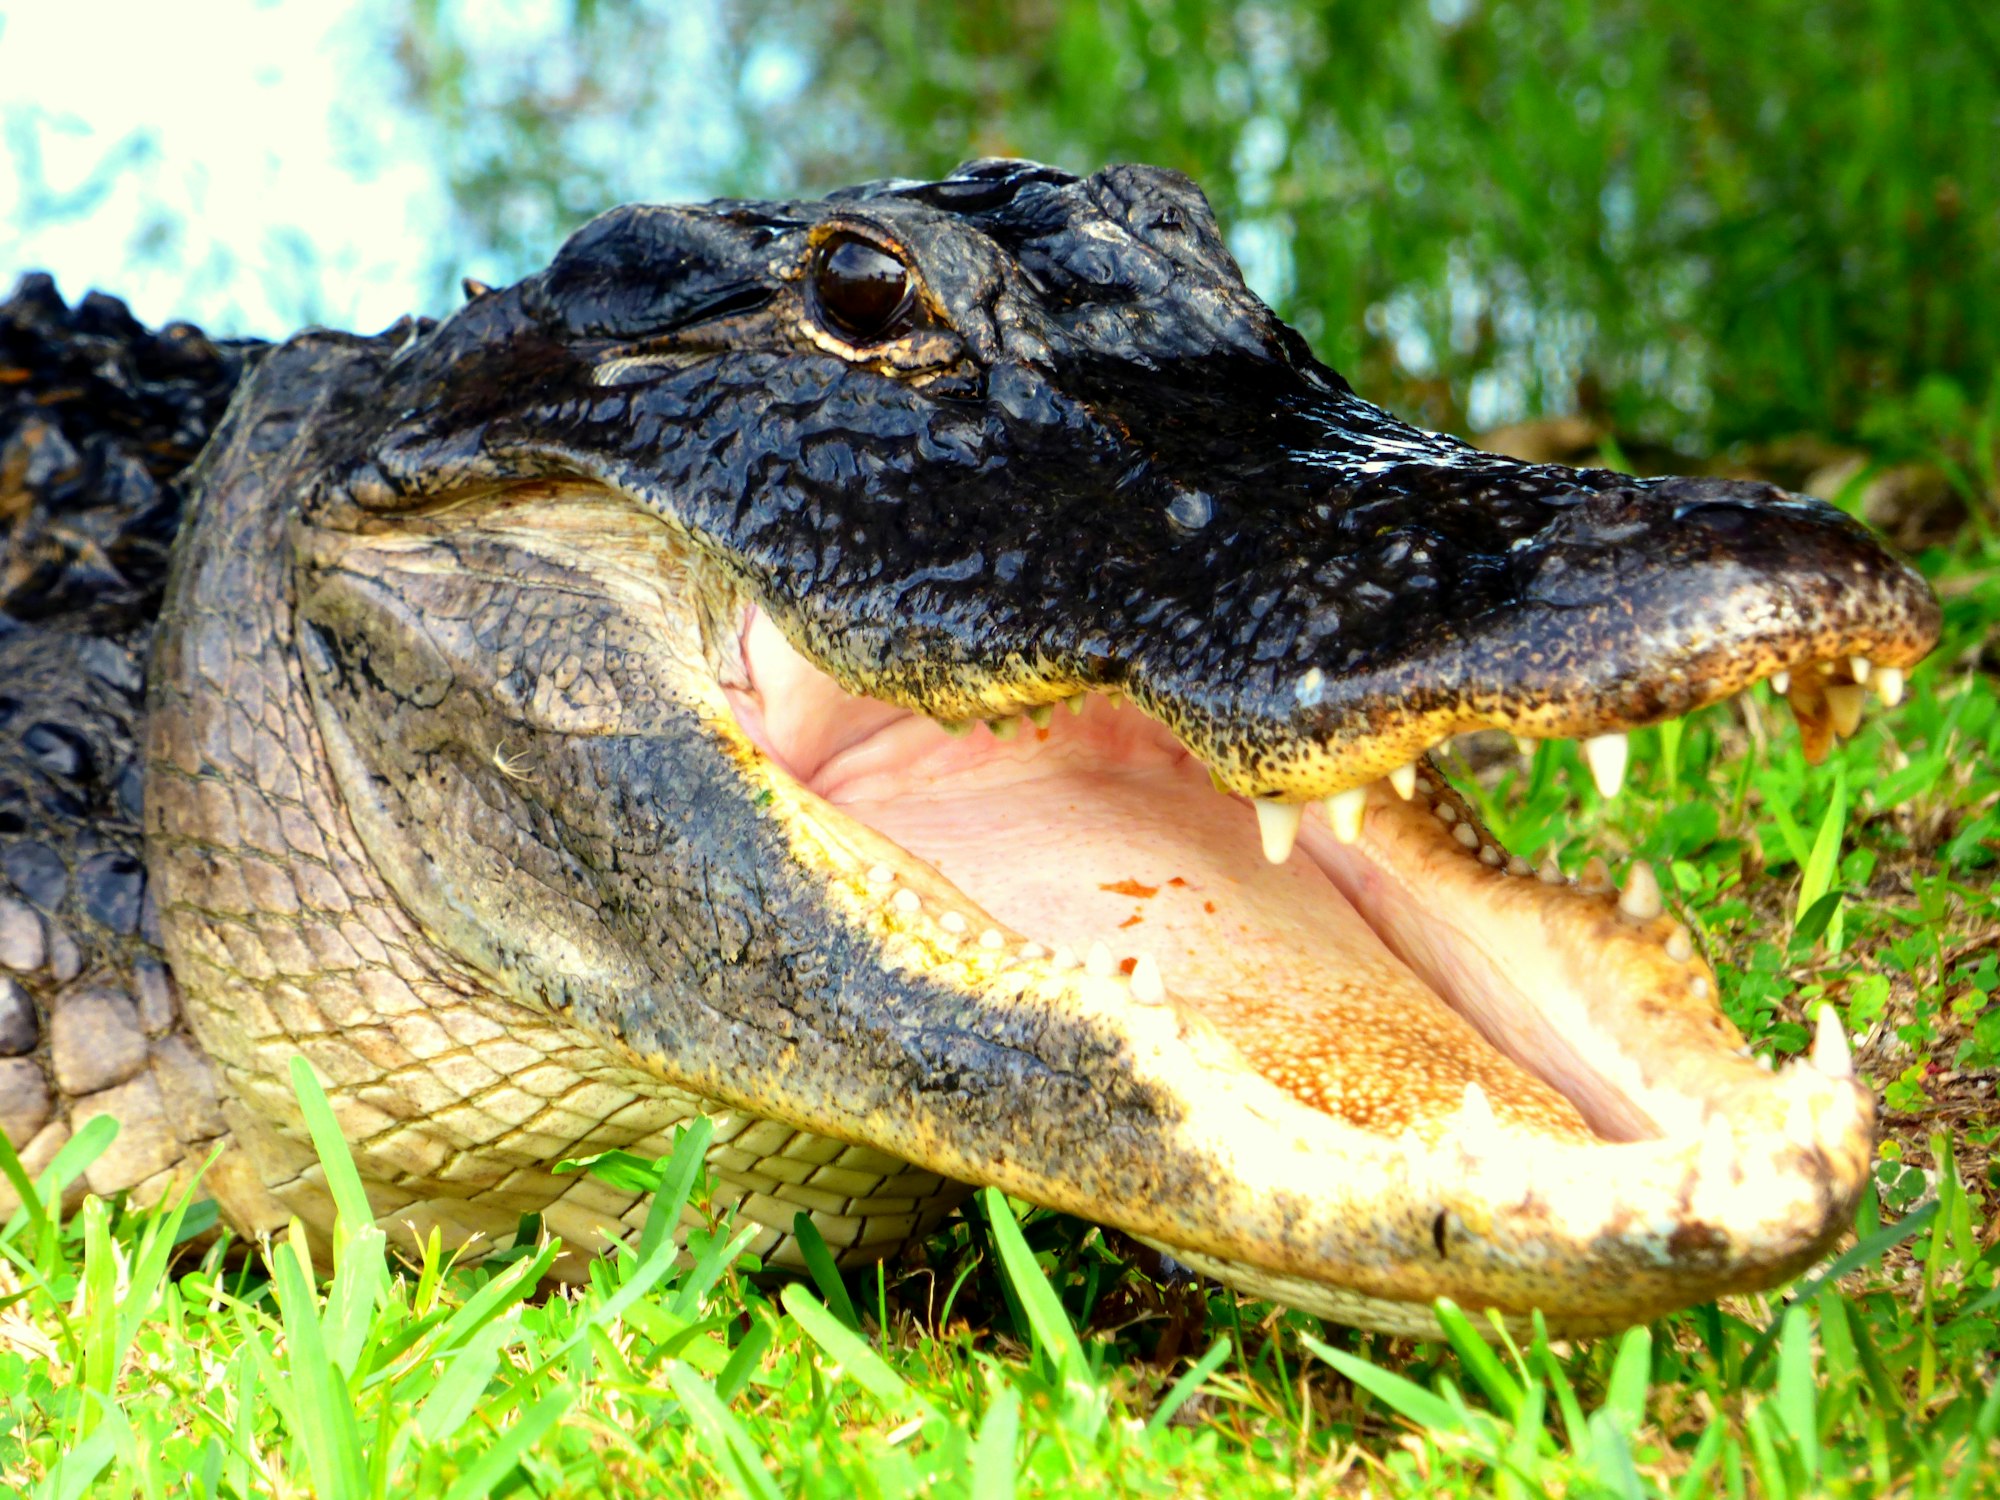 Which U.S. President Has A Pet Alligator In The White House?